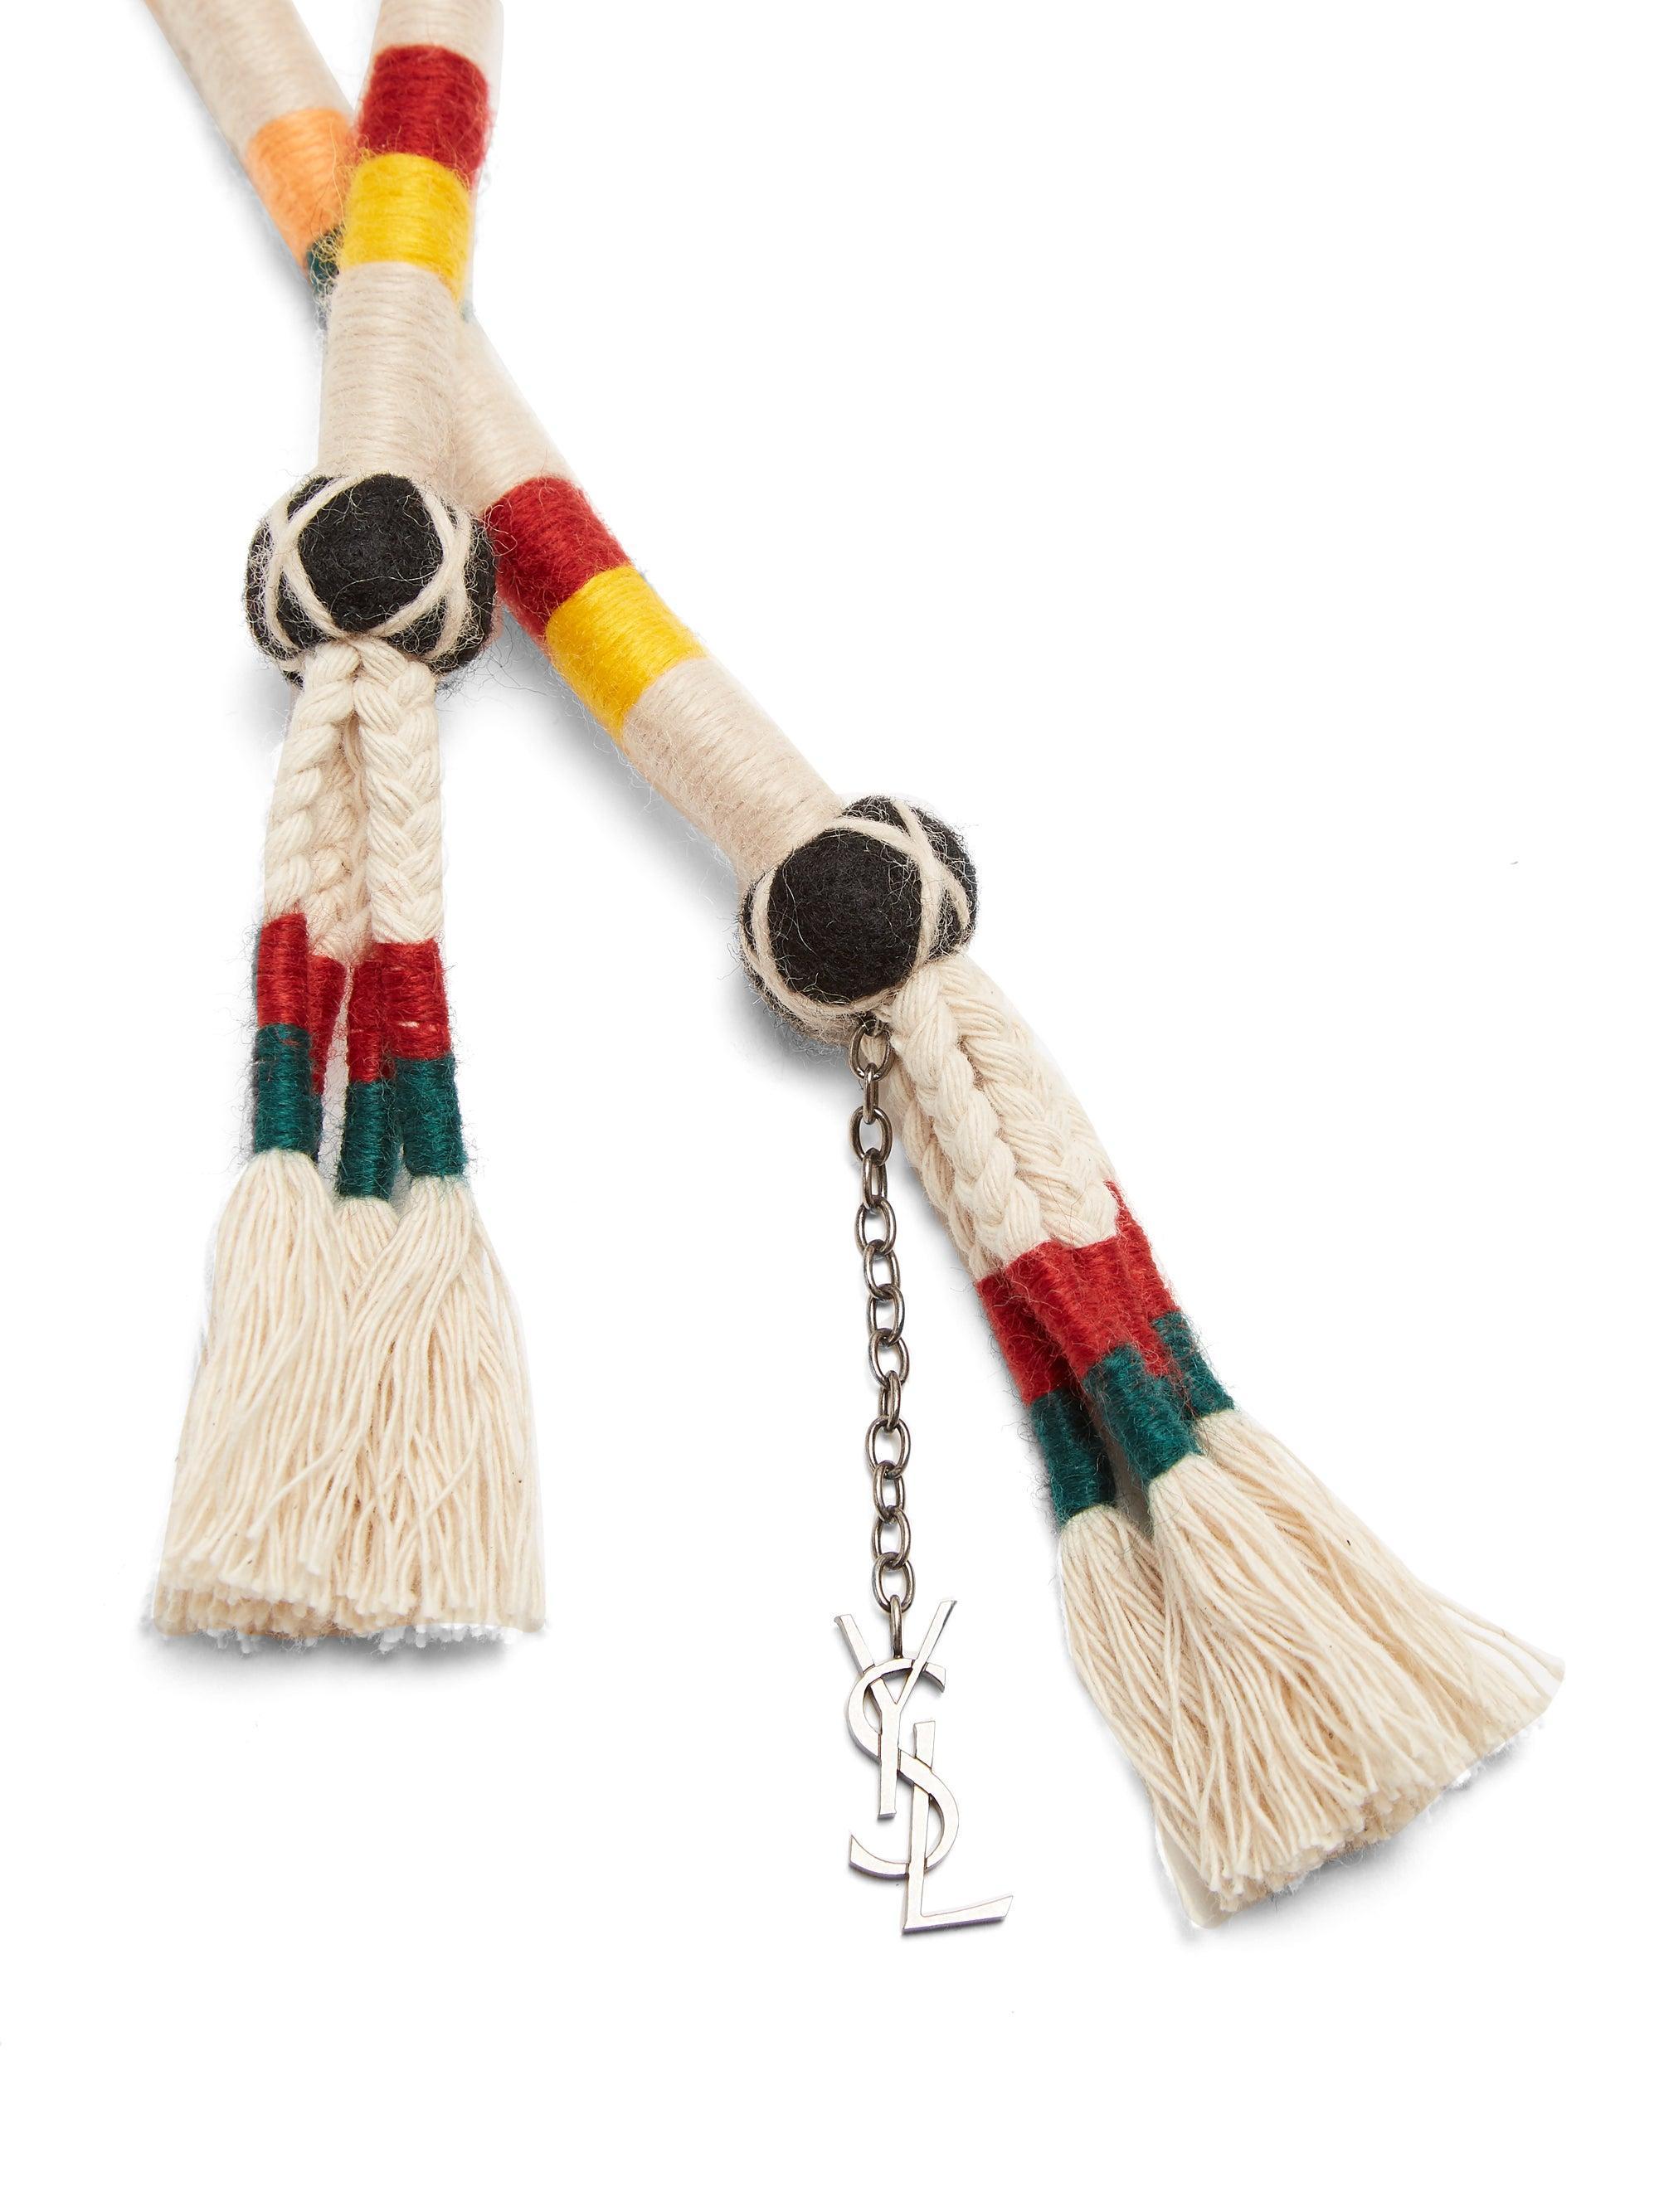 Saint Laurent SS18 Beige Rope Belt w/ Multicolor Stripes & YSL Logo Charm

Saint Laurent's beige rope belt is imbued with a 1970s craft-inspired feel. It's trimmed with multicoloured stripes, swishing tassels and a silver-tone metal YSL logo charm,